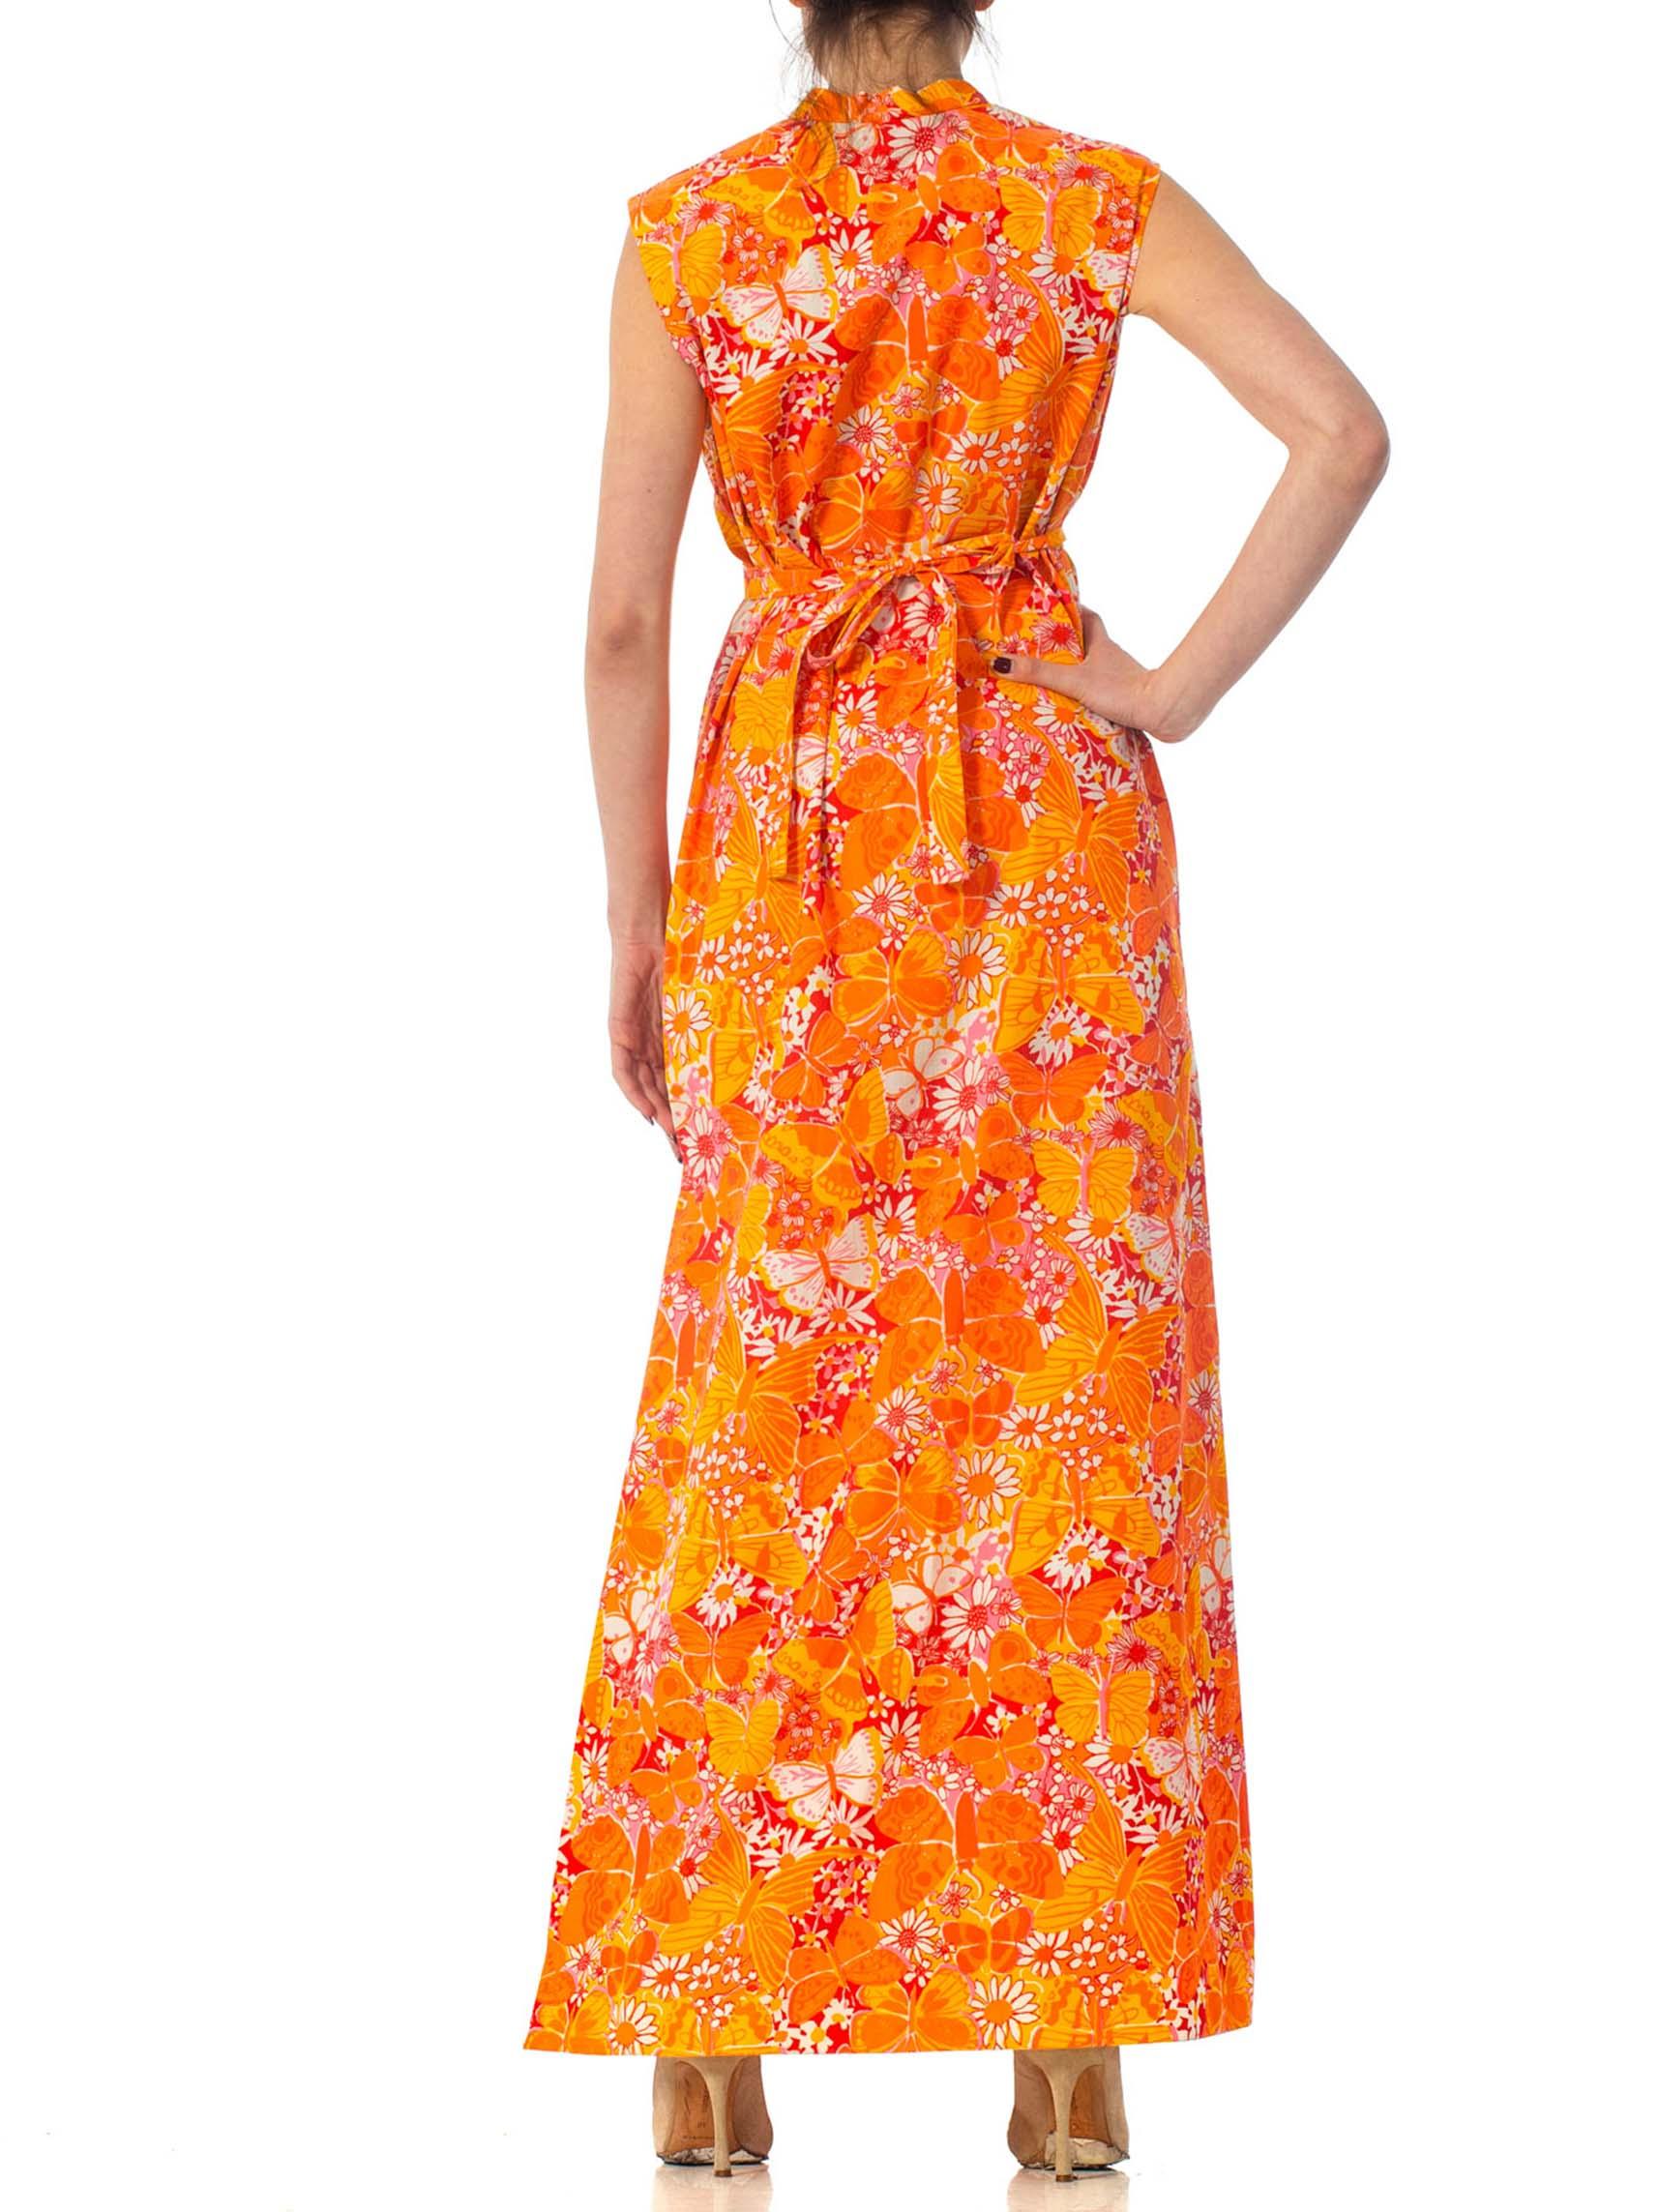 1960S Lilly Pulitzer Orange Cotton Mod Butterfly Printed Dress Xl 2